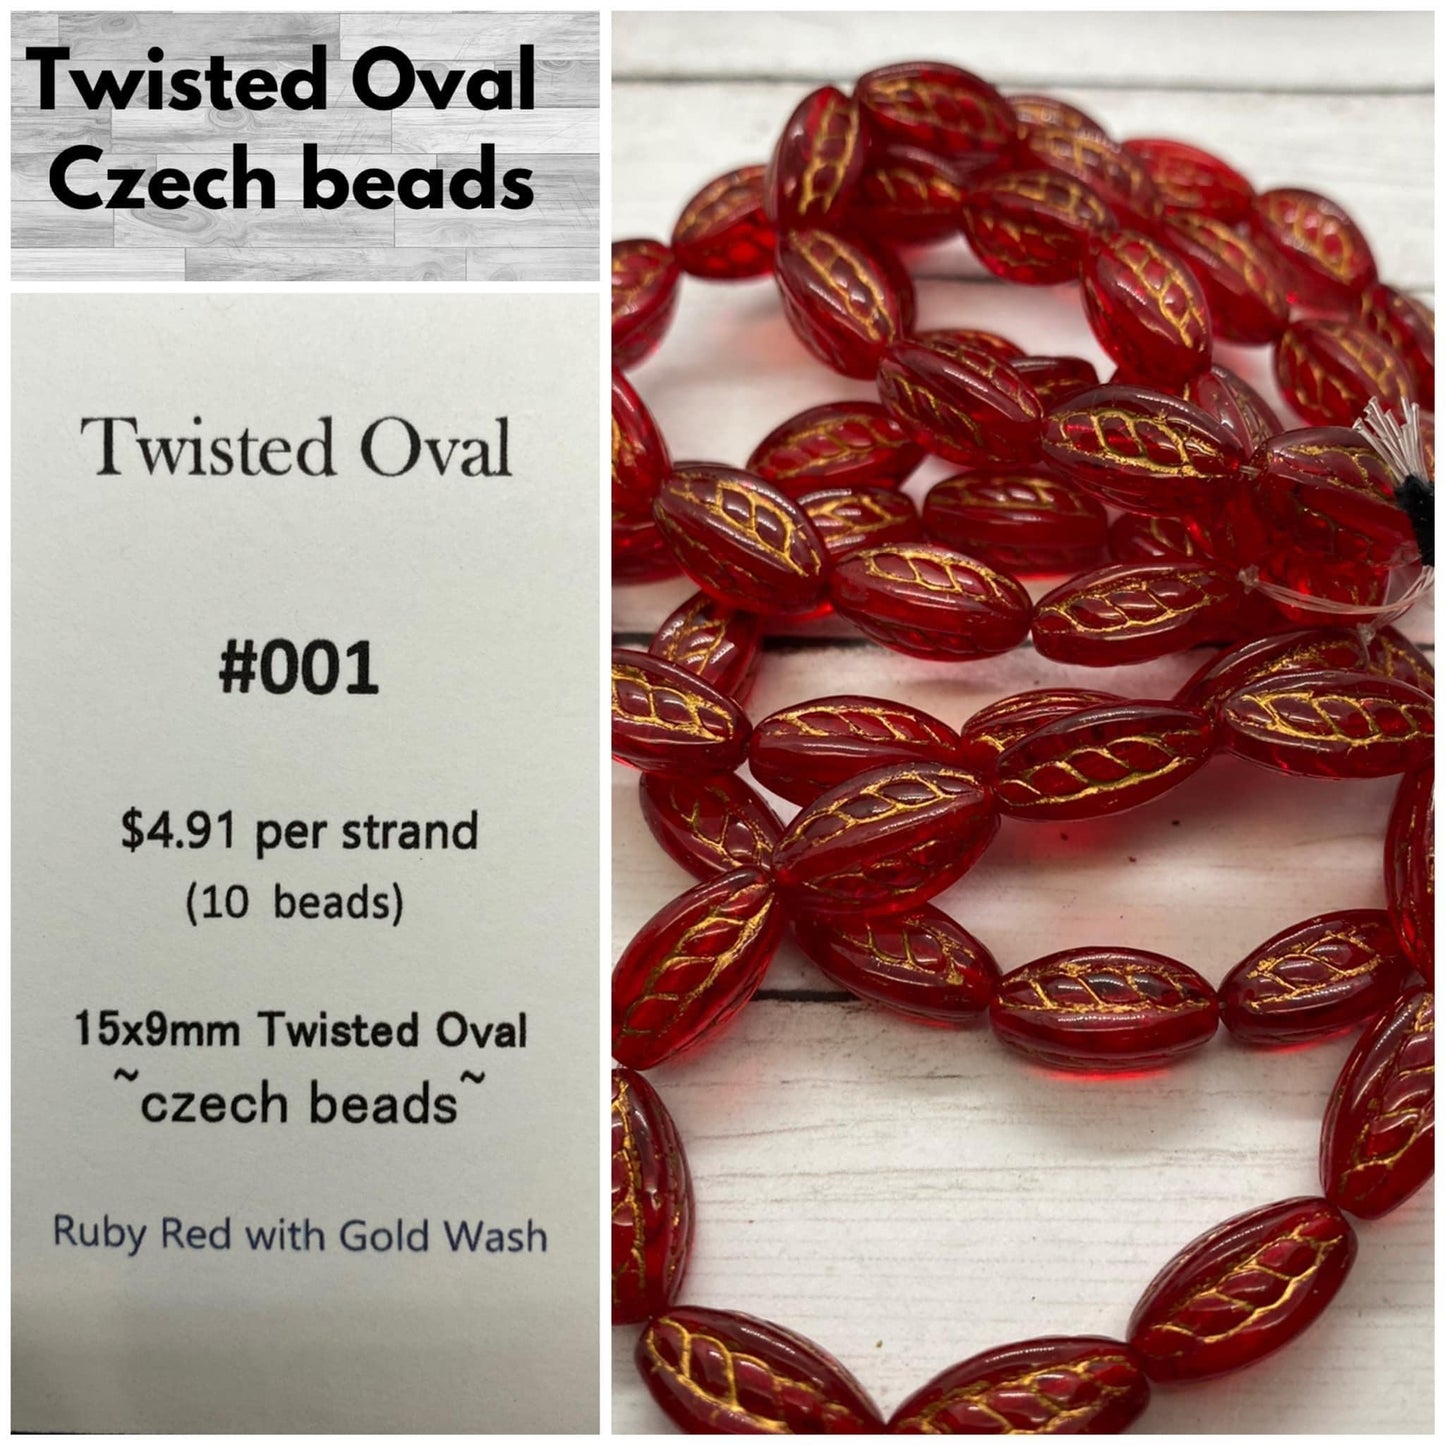 Twisted Oval 15x9mm #001